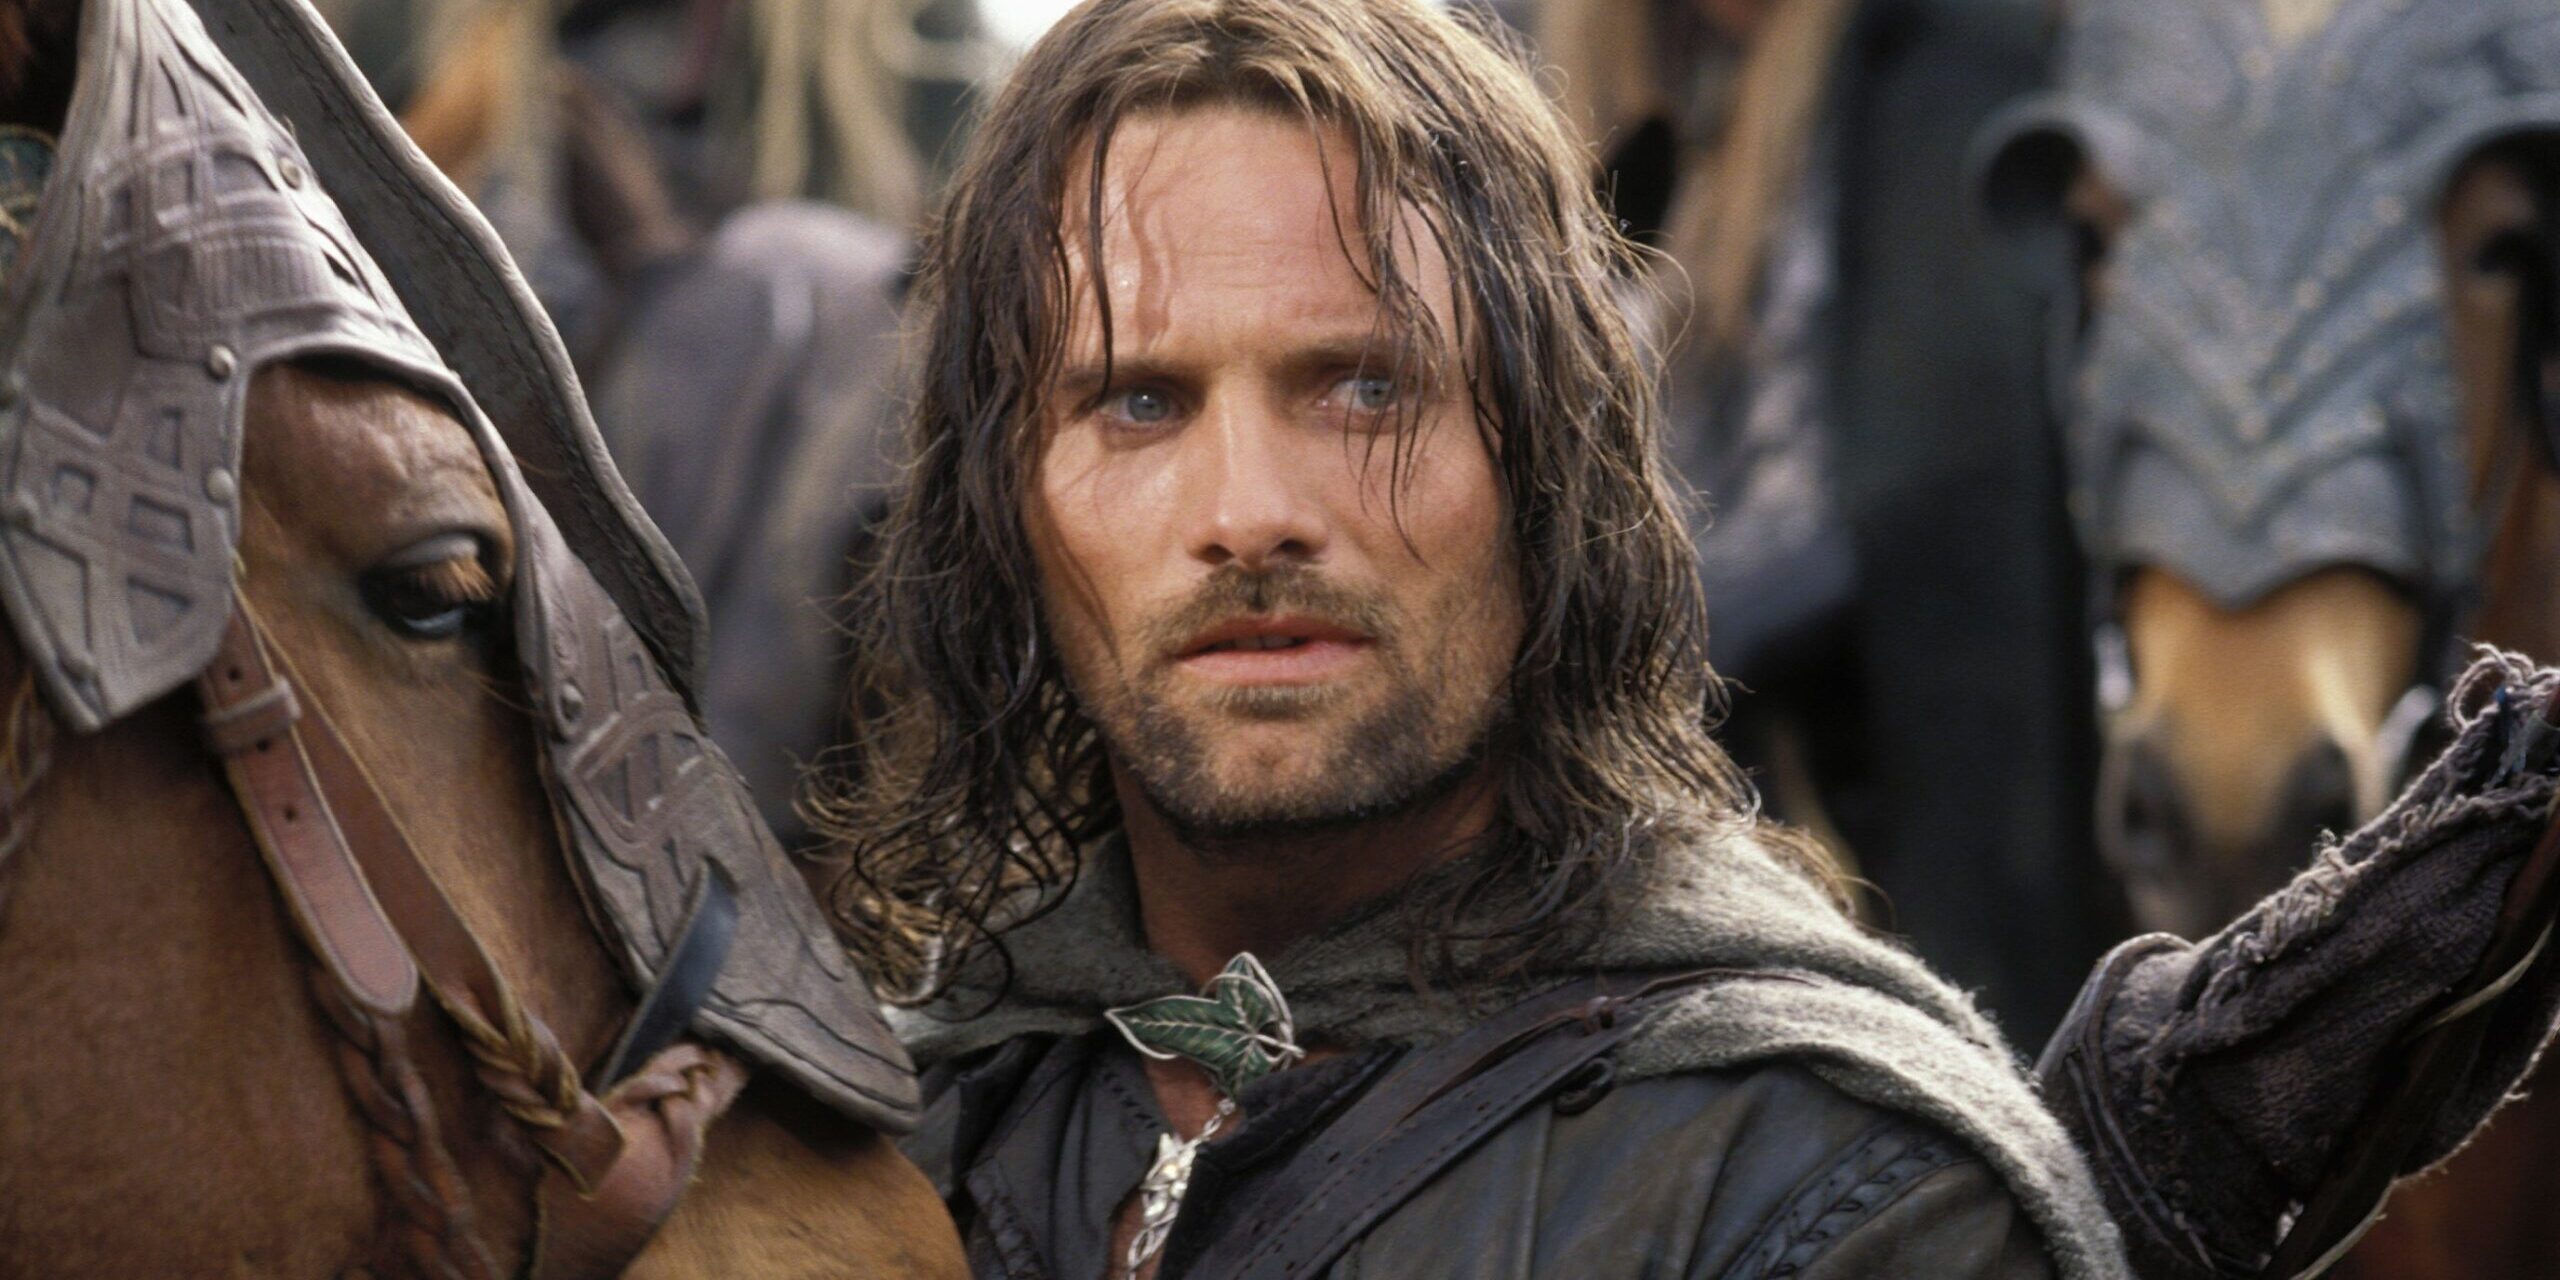 Aragorn from the Lord of the Rings instead of Ken: Margot Robbie named her crush in the movie